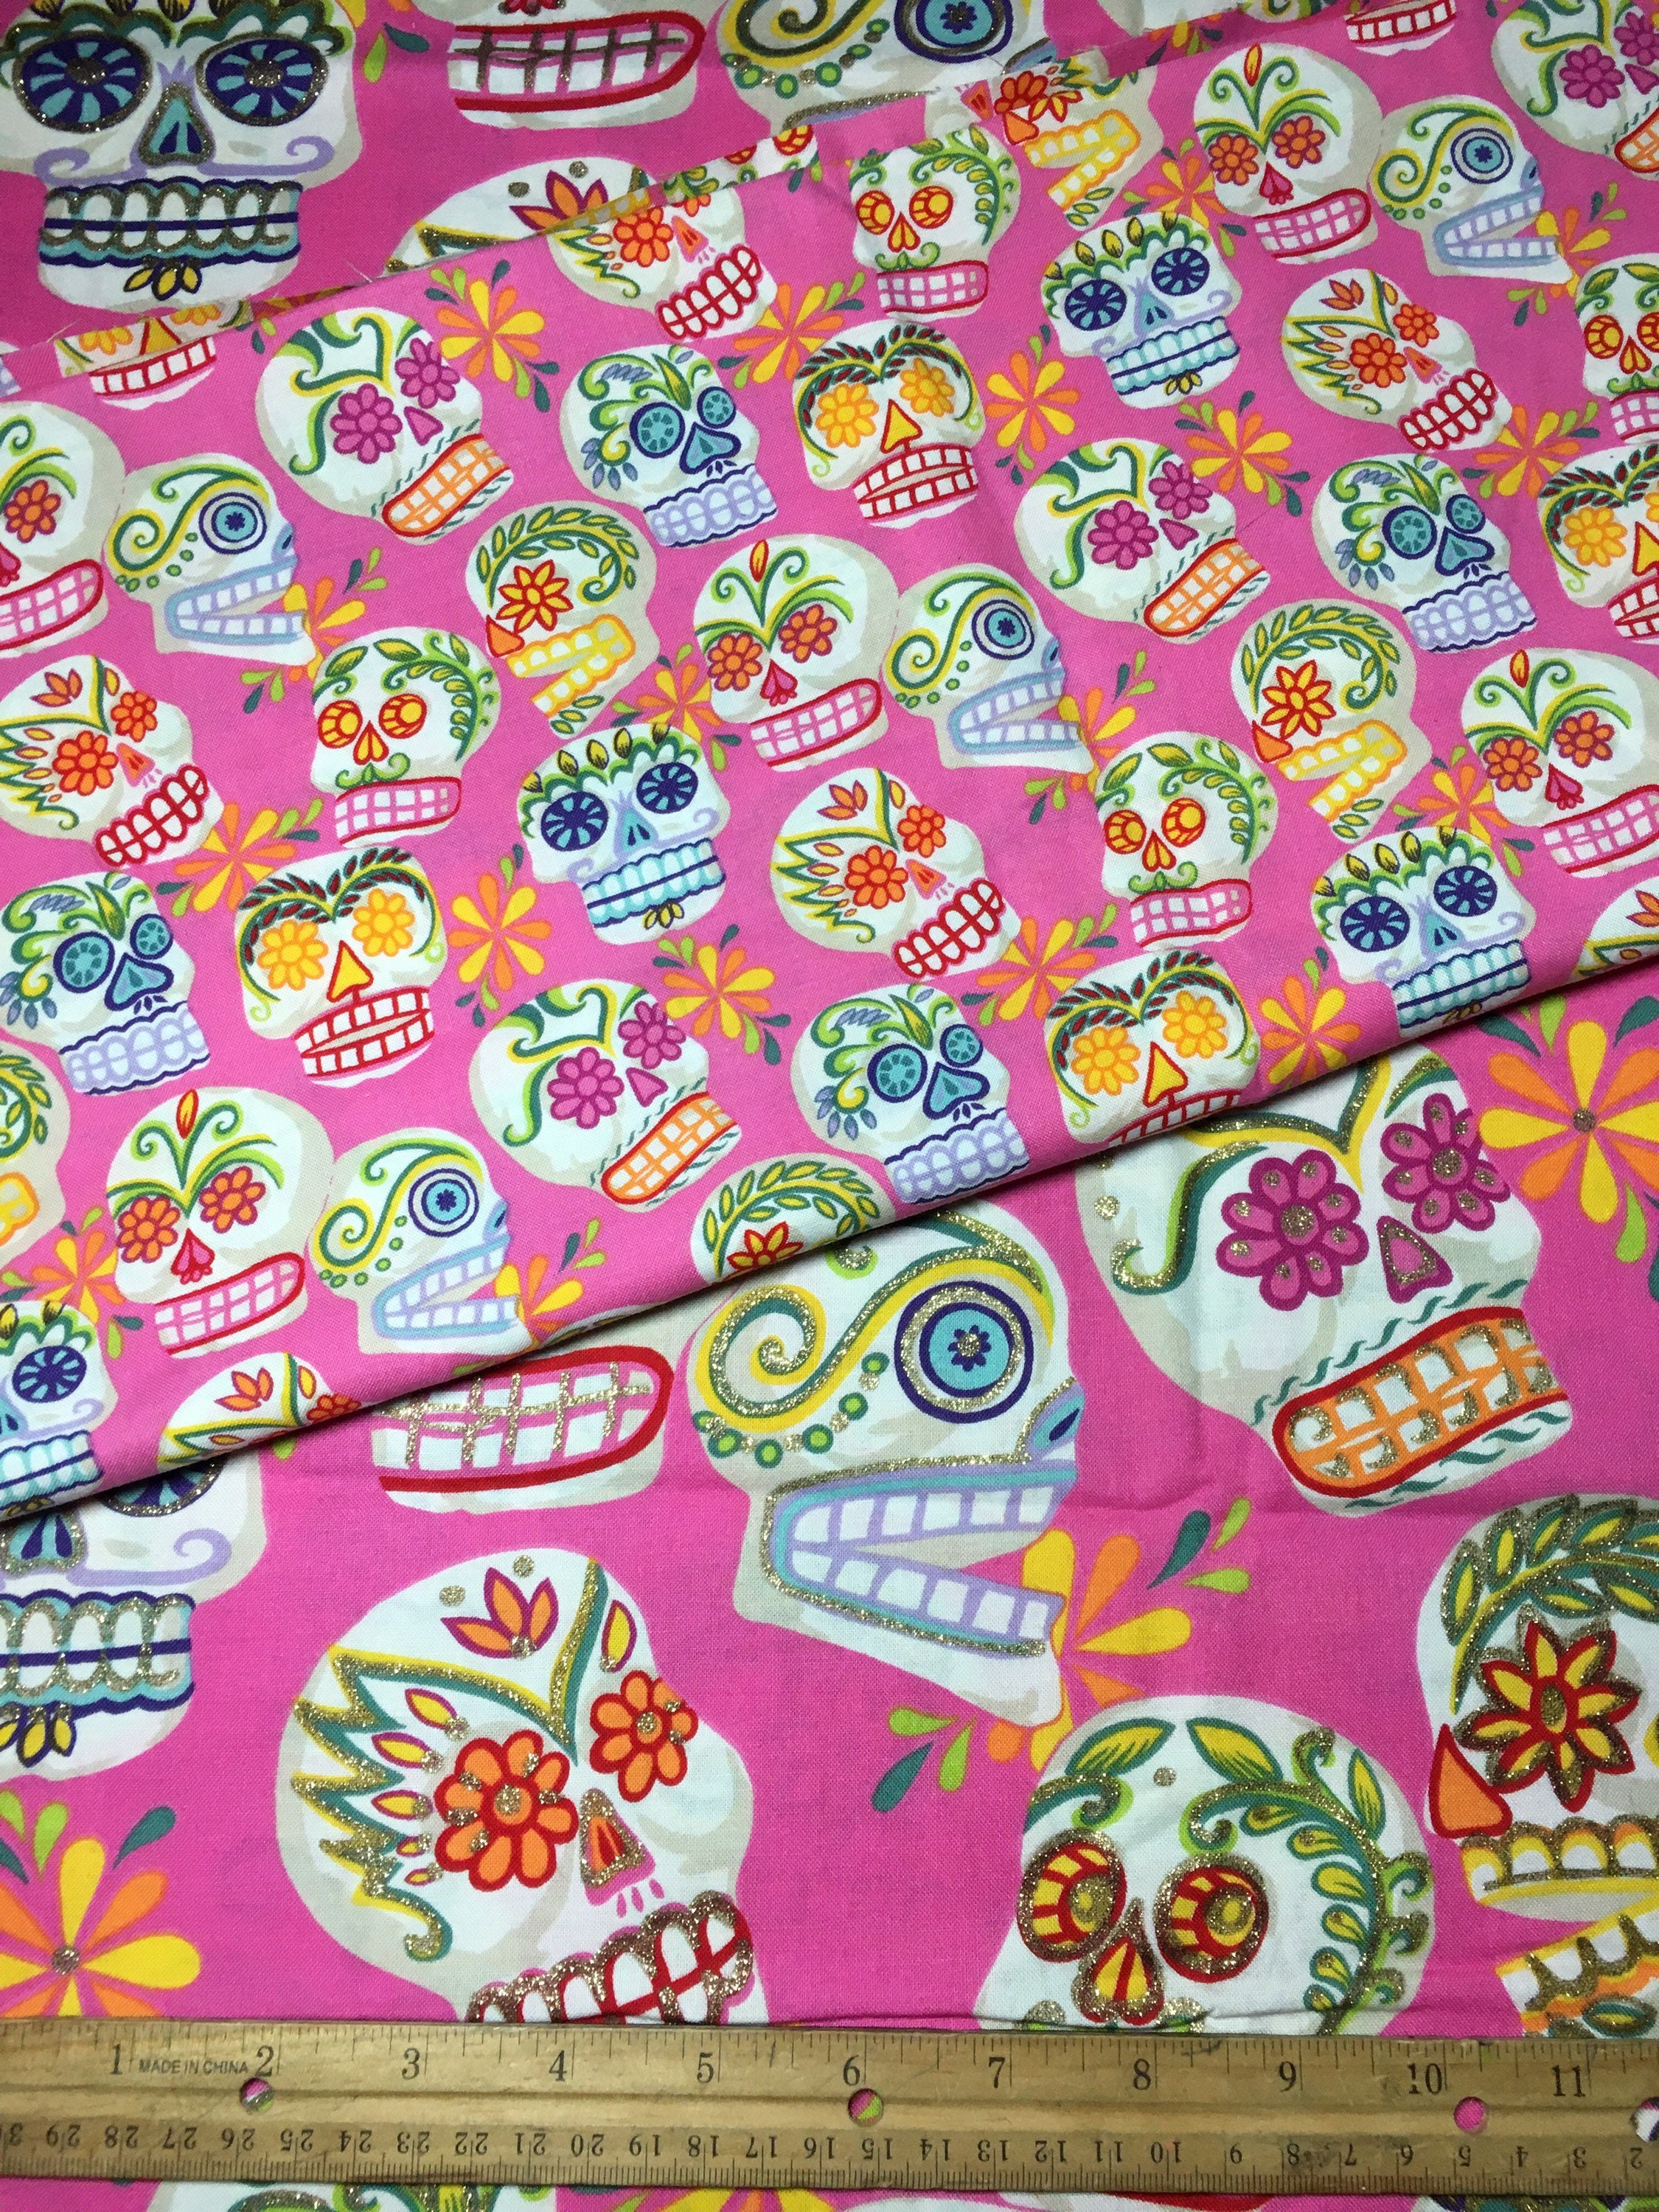 - Henry Collection Novios Folk Alexander Skull of Cotton 18x21.75 Mexican Fabric Sugar 2007 Los Etsy Day Dead Sewing the